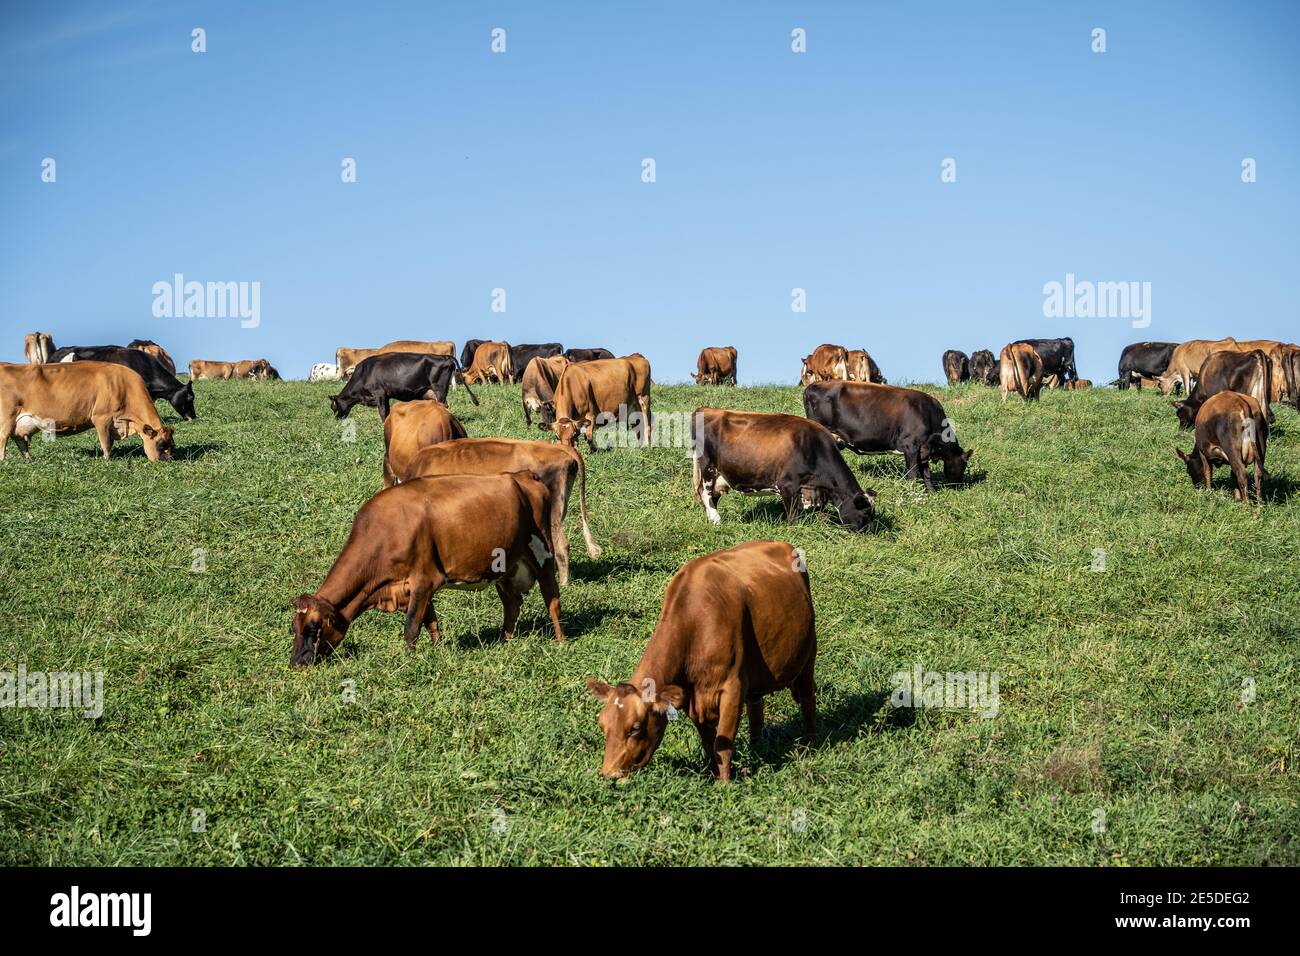 A herd of Jersey cows grazing in field. Stock Photo